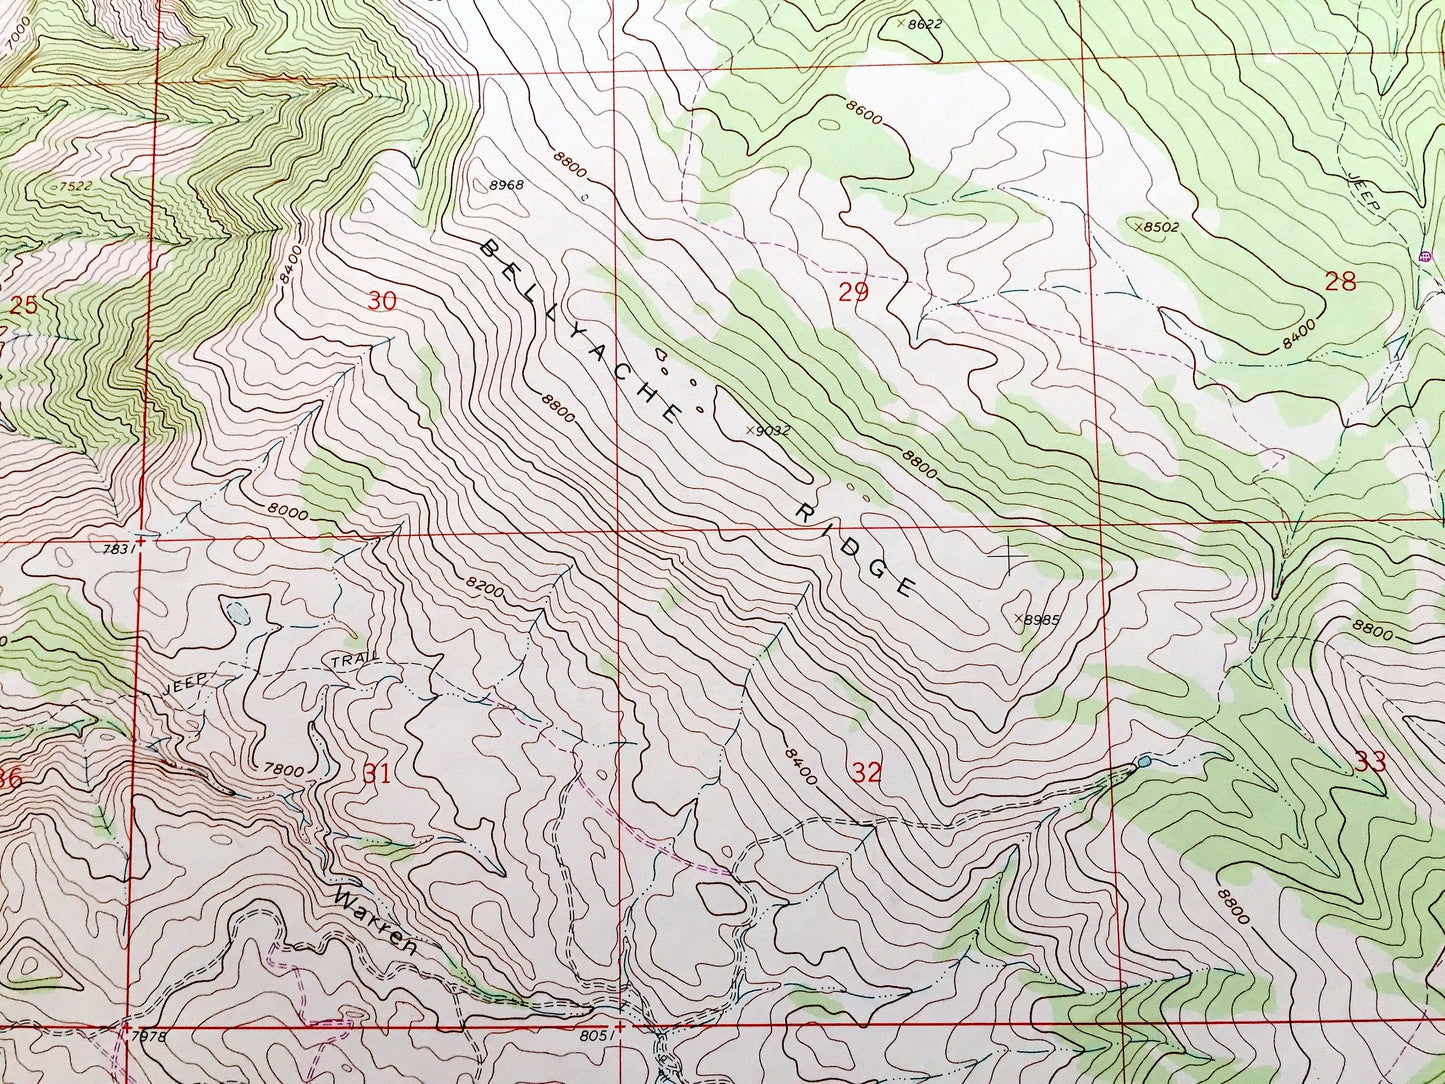 Antique Wolcott, Colorado 1962 US Geological Survey Topographic Map – White River National Forest, Eagle County, Rockies, Eagle River, CO